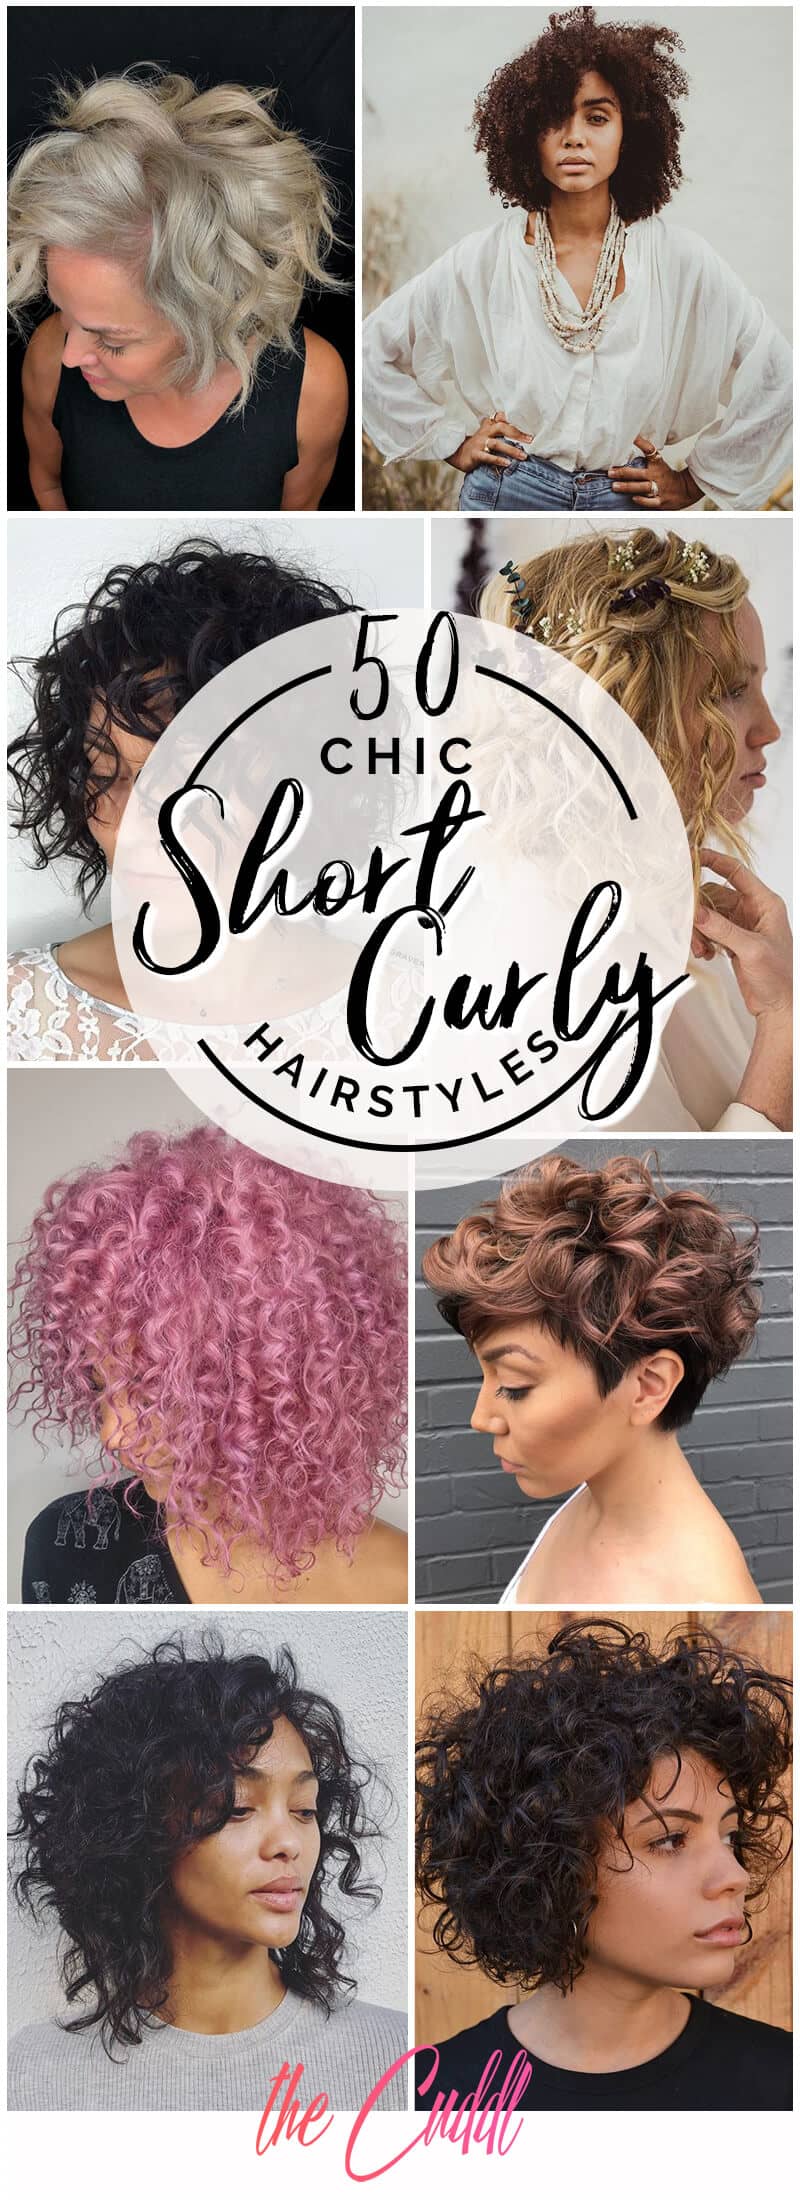 50 Short Curly Hairstyle Ideas to Step Up Your Style Game